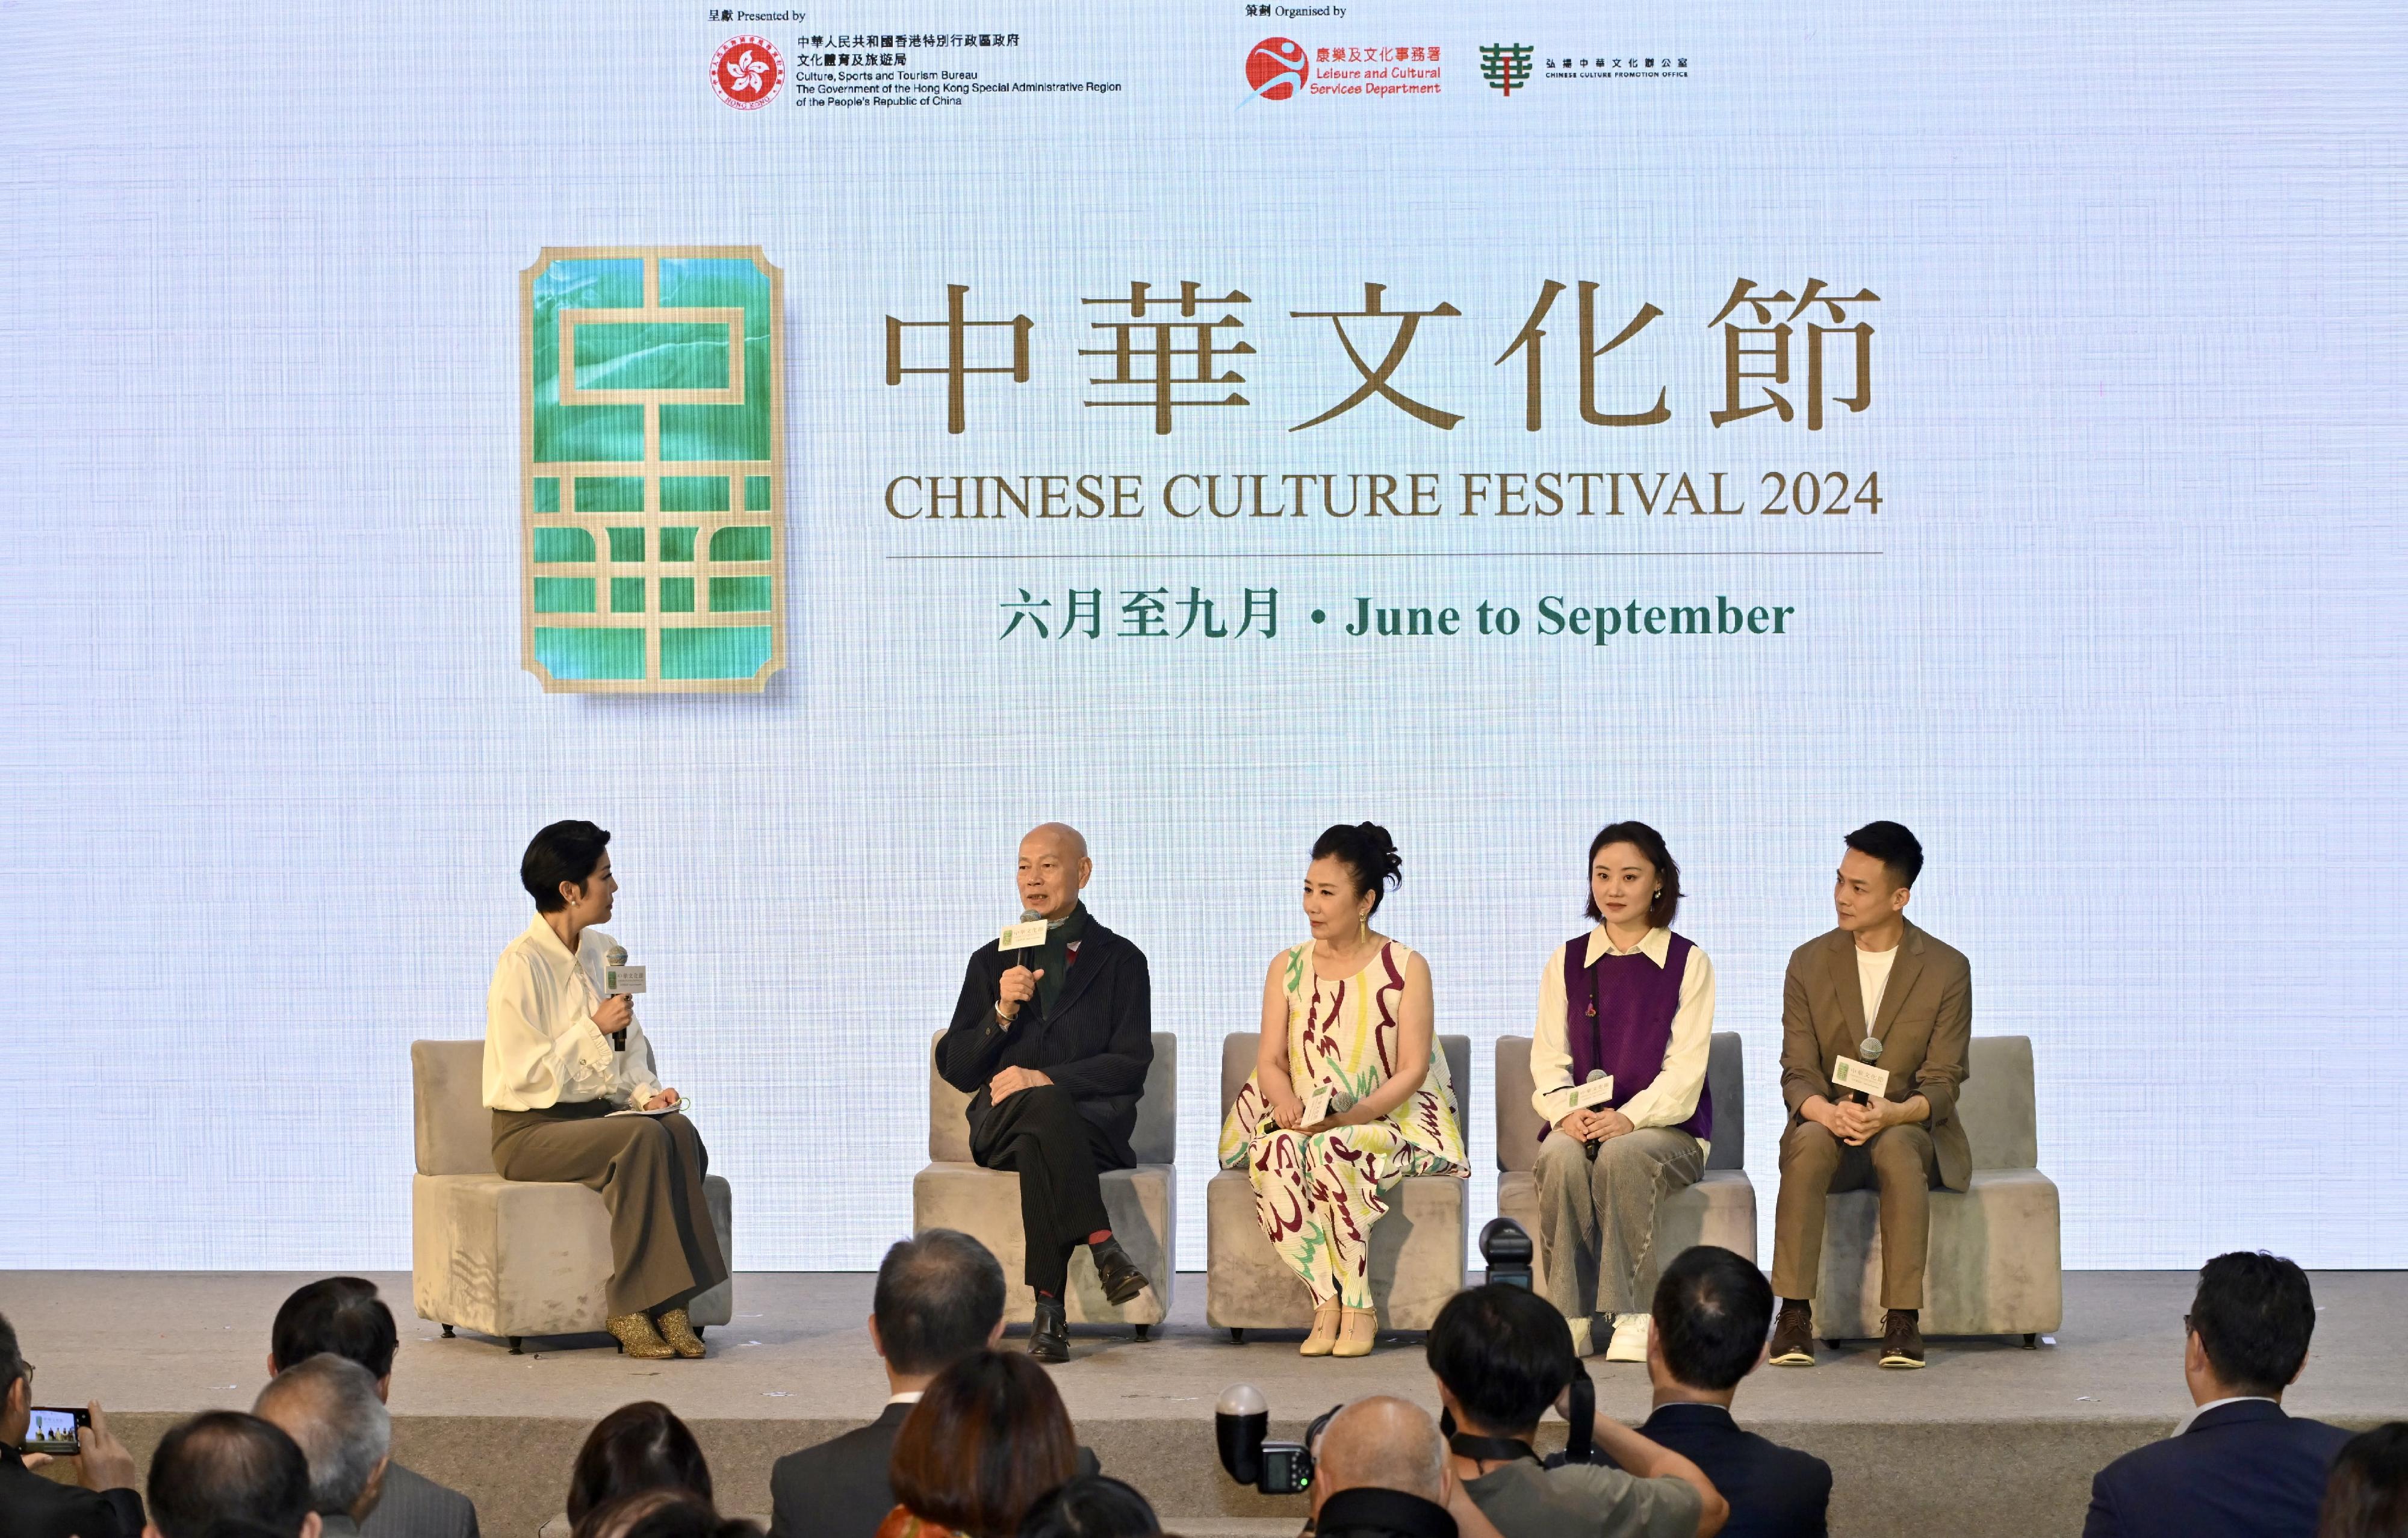 The programme parade of the first Chinese Culture Festival was held today (April 18) at the Hong Kong Cultural Centre. Photo shows Cantonese opera virtuosos Law Ka-ying (second left) and Liza Wang (centre), as well as Yang Xiayun (second right) and Lou Sheng (first right), winners of the China Theatre Plum Blossom Award from the Zhejiang Wu Opera Research Centre, sharing their views on the innovation and heritage of the Chinese opera at the programme parade.